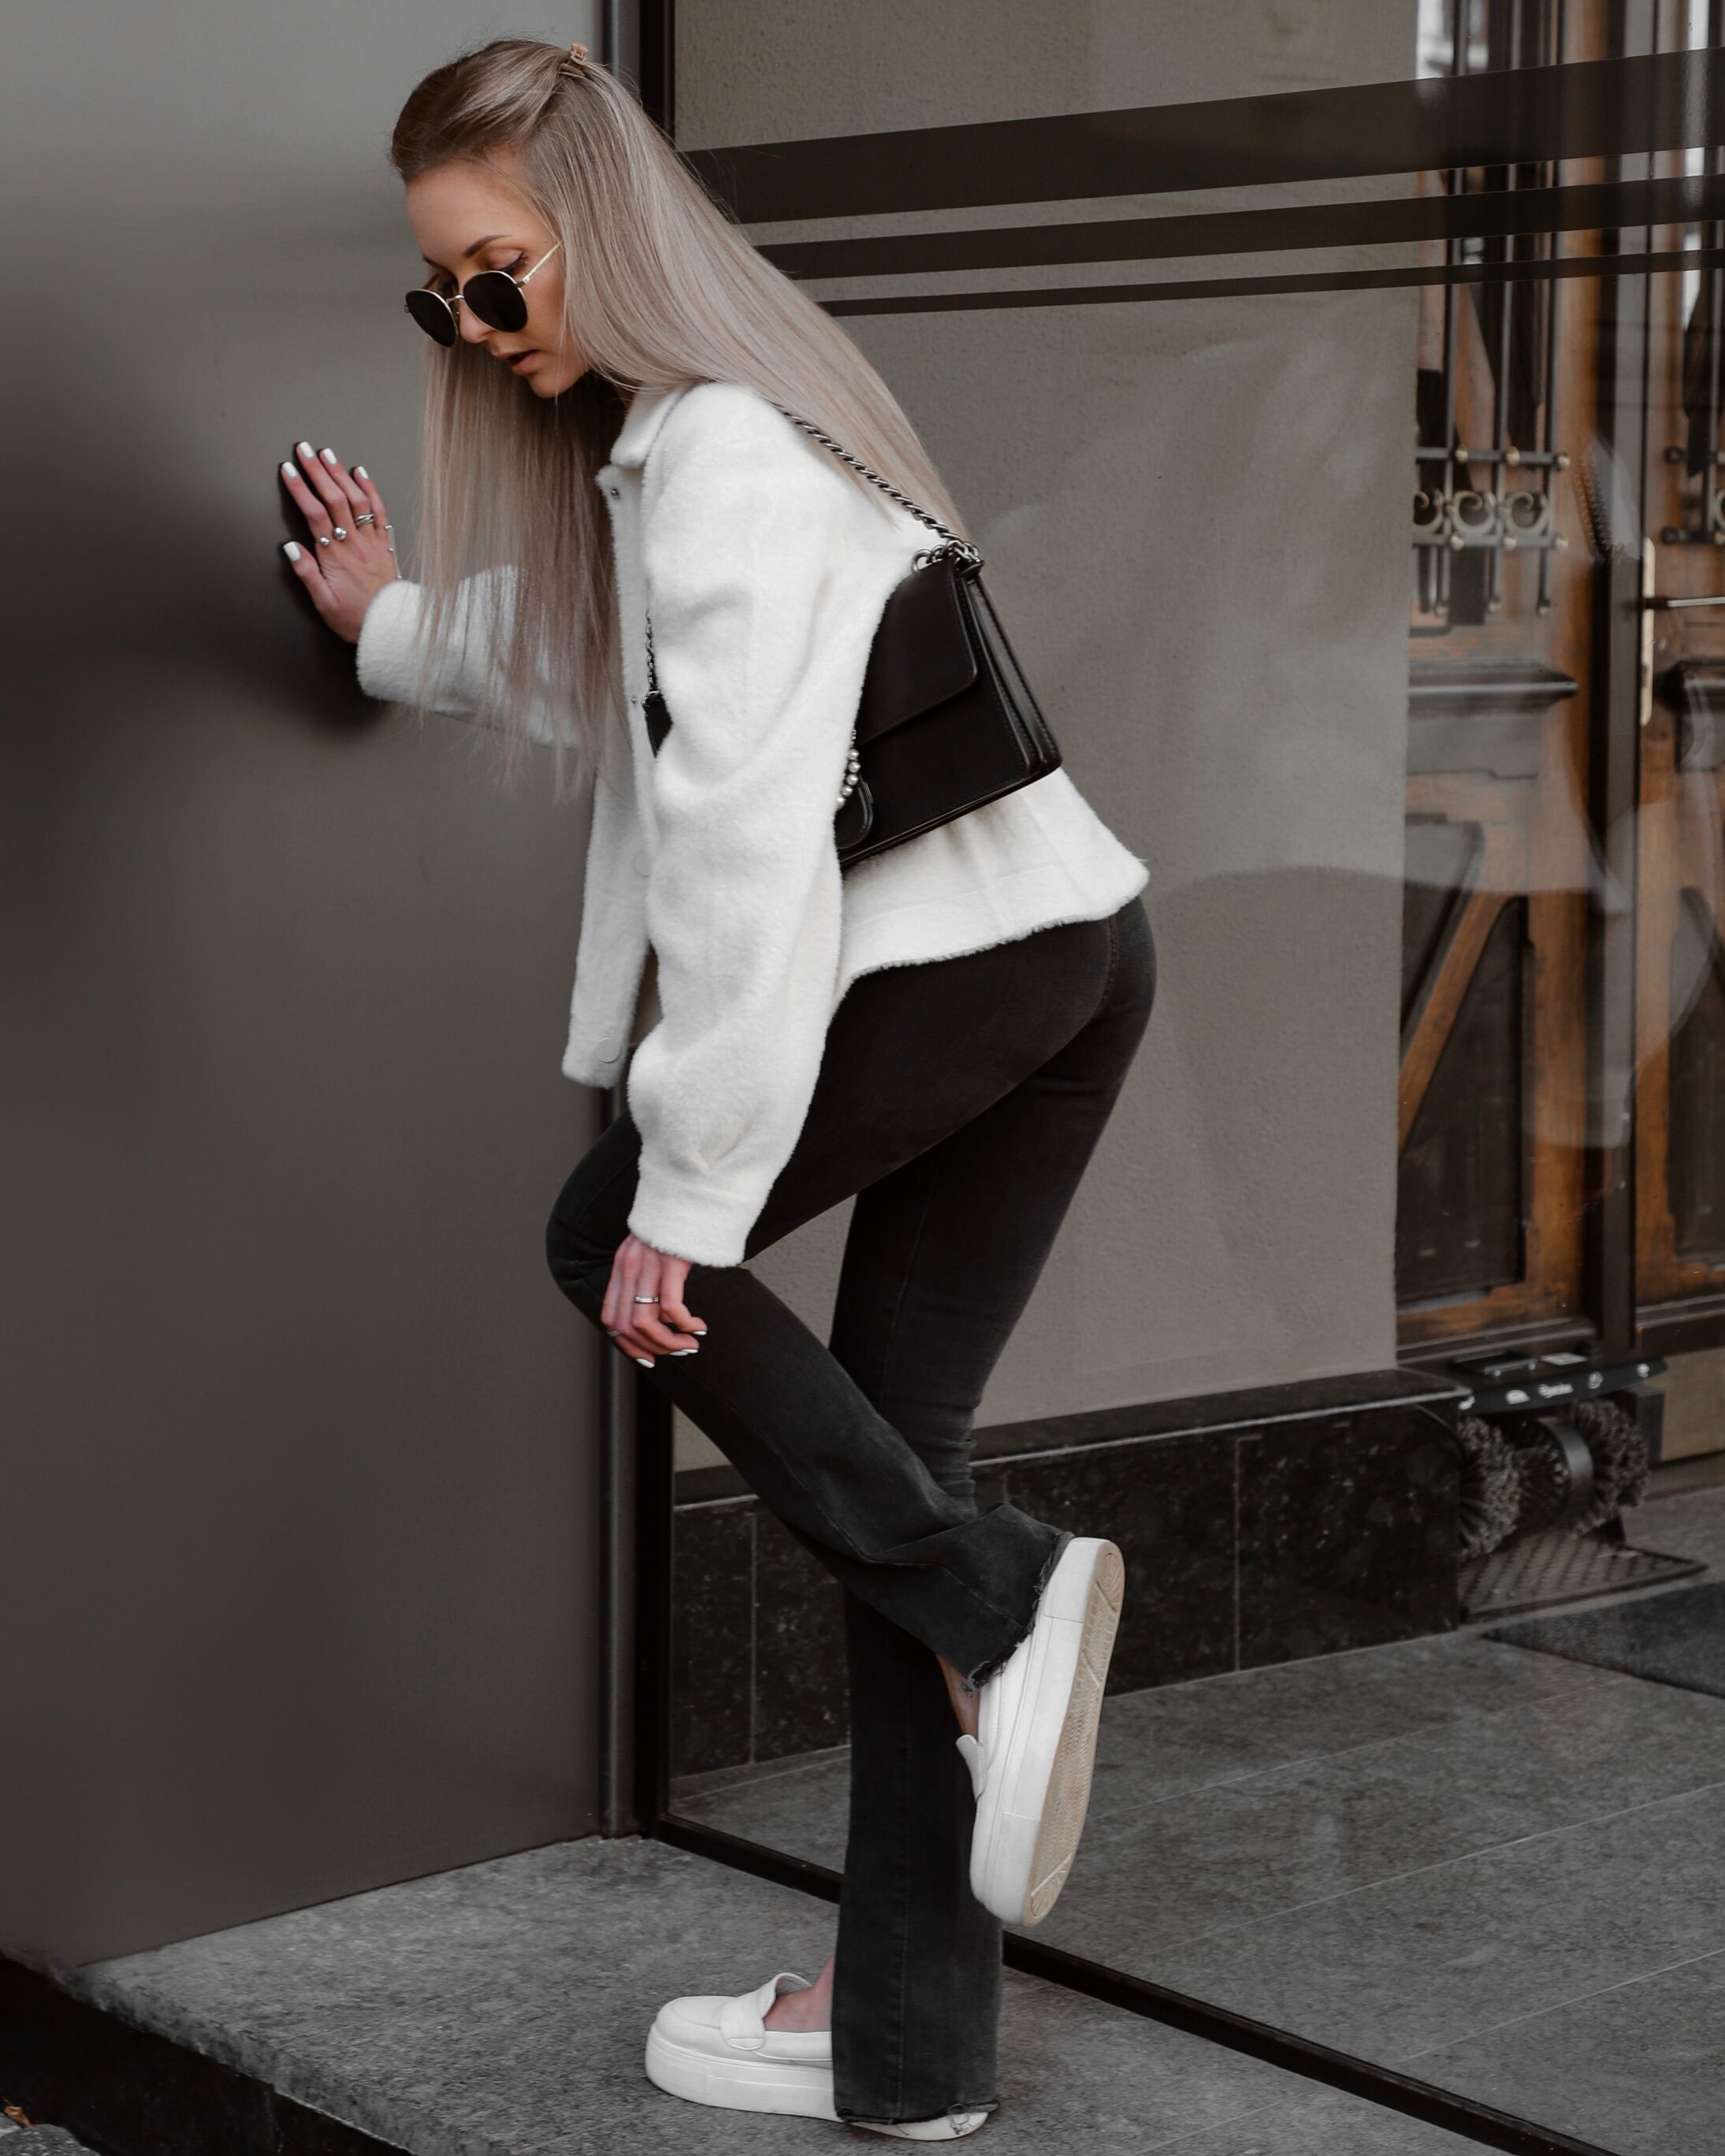 White T-Shirt, Furry Jacket, and White Loafers